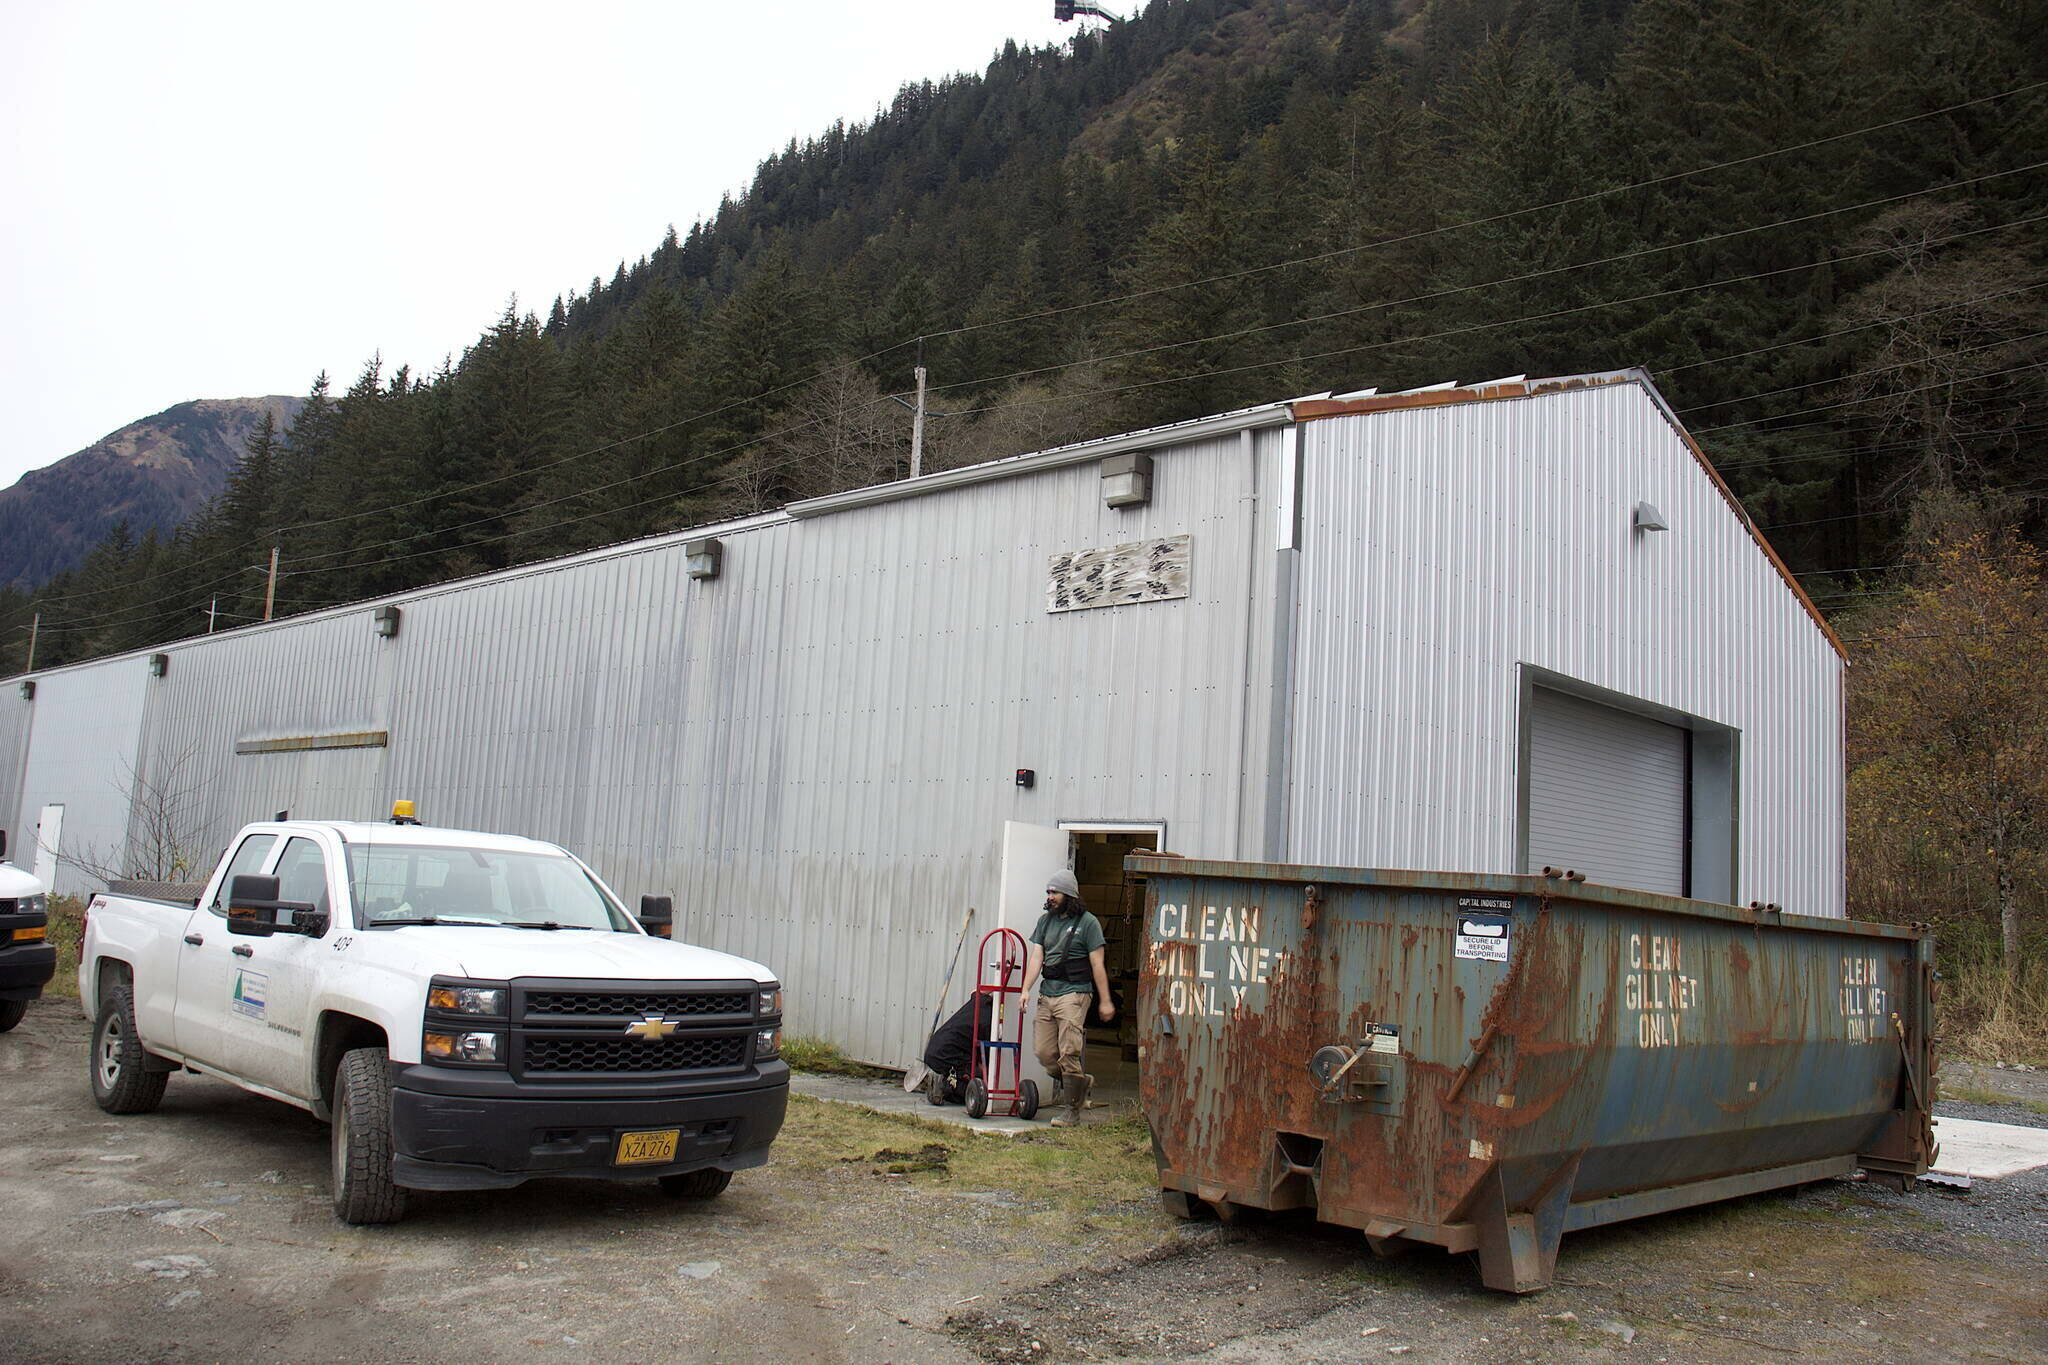 A city-owned warehouse about a mile south of the Goldbelt Tram is scheduled to open as a winter warming shelter starting Friday. The shelter will have cots, hand-washing stations, outdoor portable restrooms and other basic services. (Mark Sabbatini / Juneau Empire)